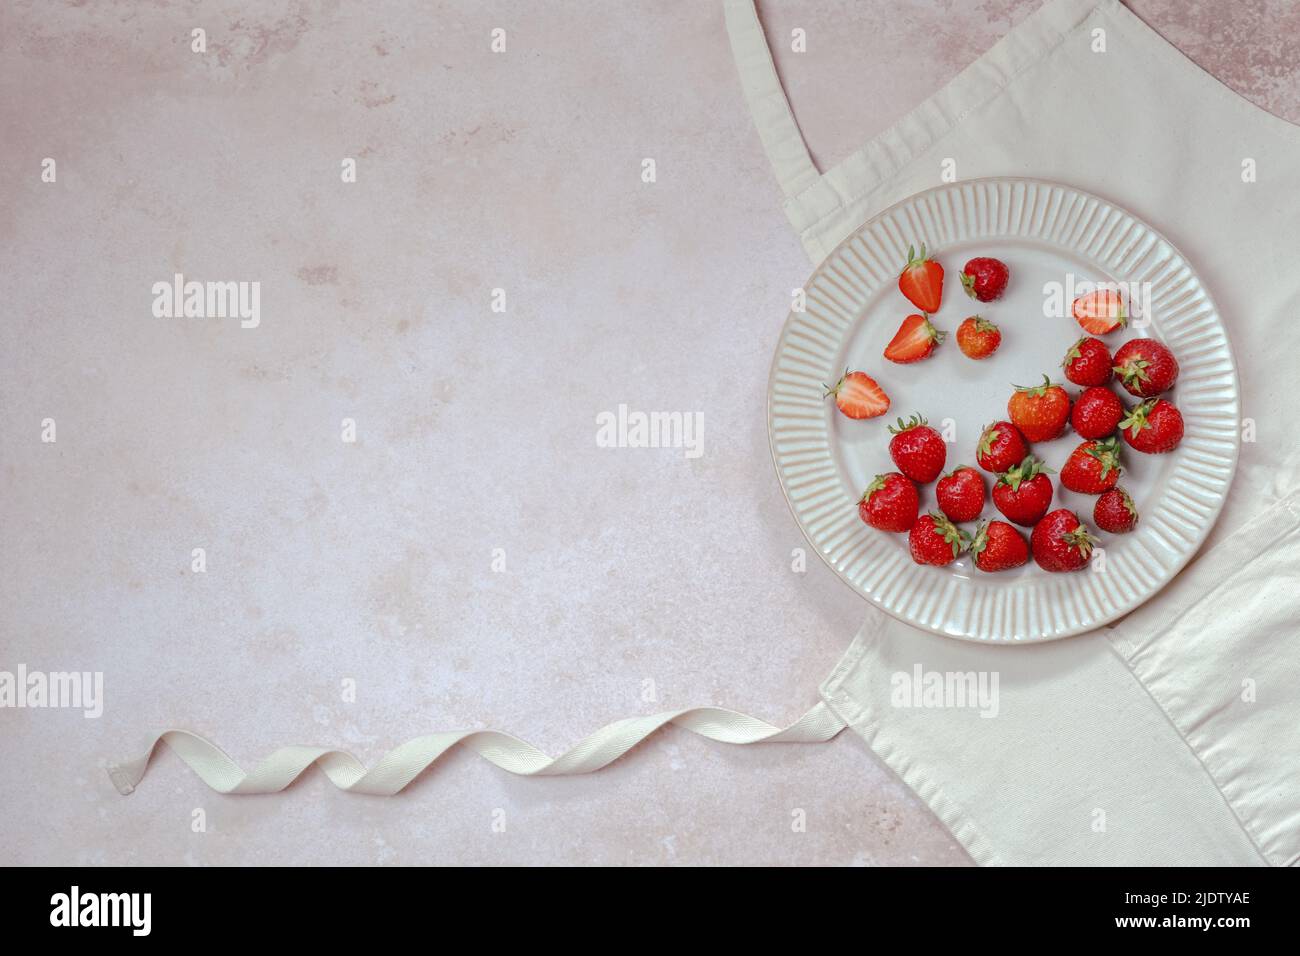 Recipes for summer holiday baking. Strawberries in a plate on a mockup apron. text background, sweet pastries. top view. Stock Photo